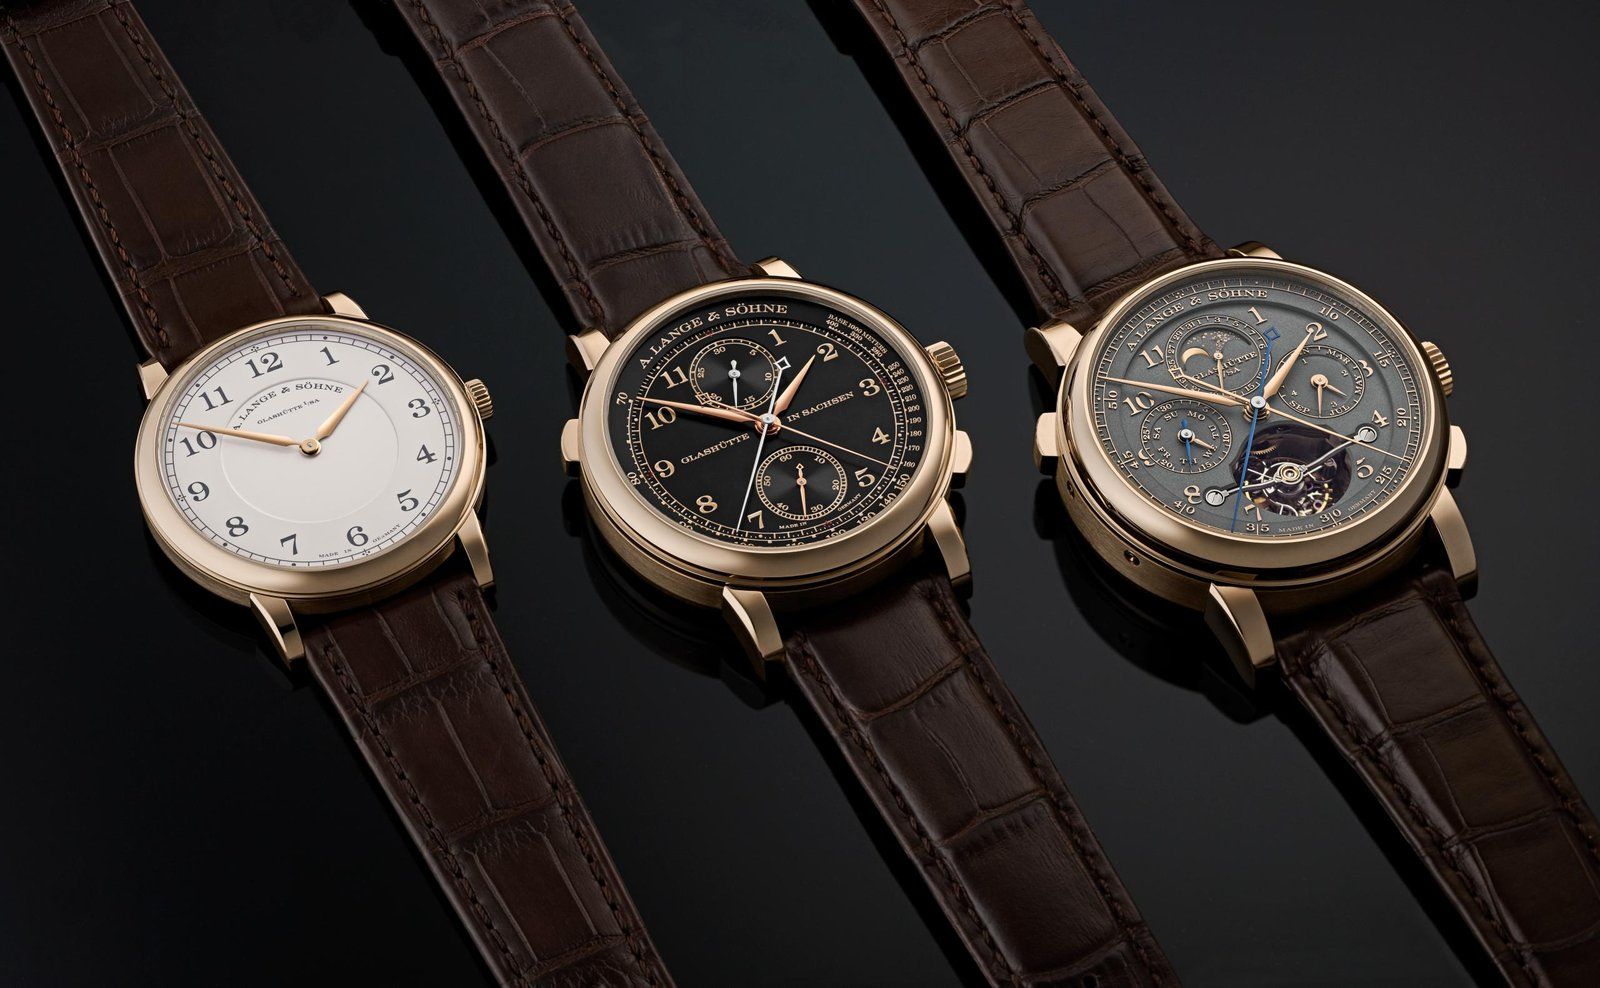 The “Homage to F. A. Lange” 2020 anniversary editions from left to right: 1815 THIN HONEYGOLD, 1815 RATTRAPANTE HONEYGOLD and TOURBOGRAPH PERPETUAL HONEYGOLD